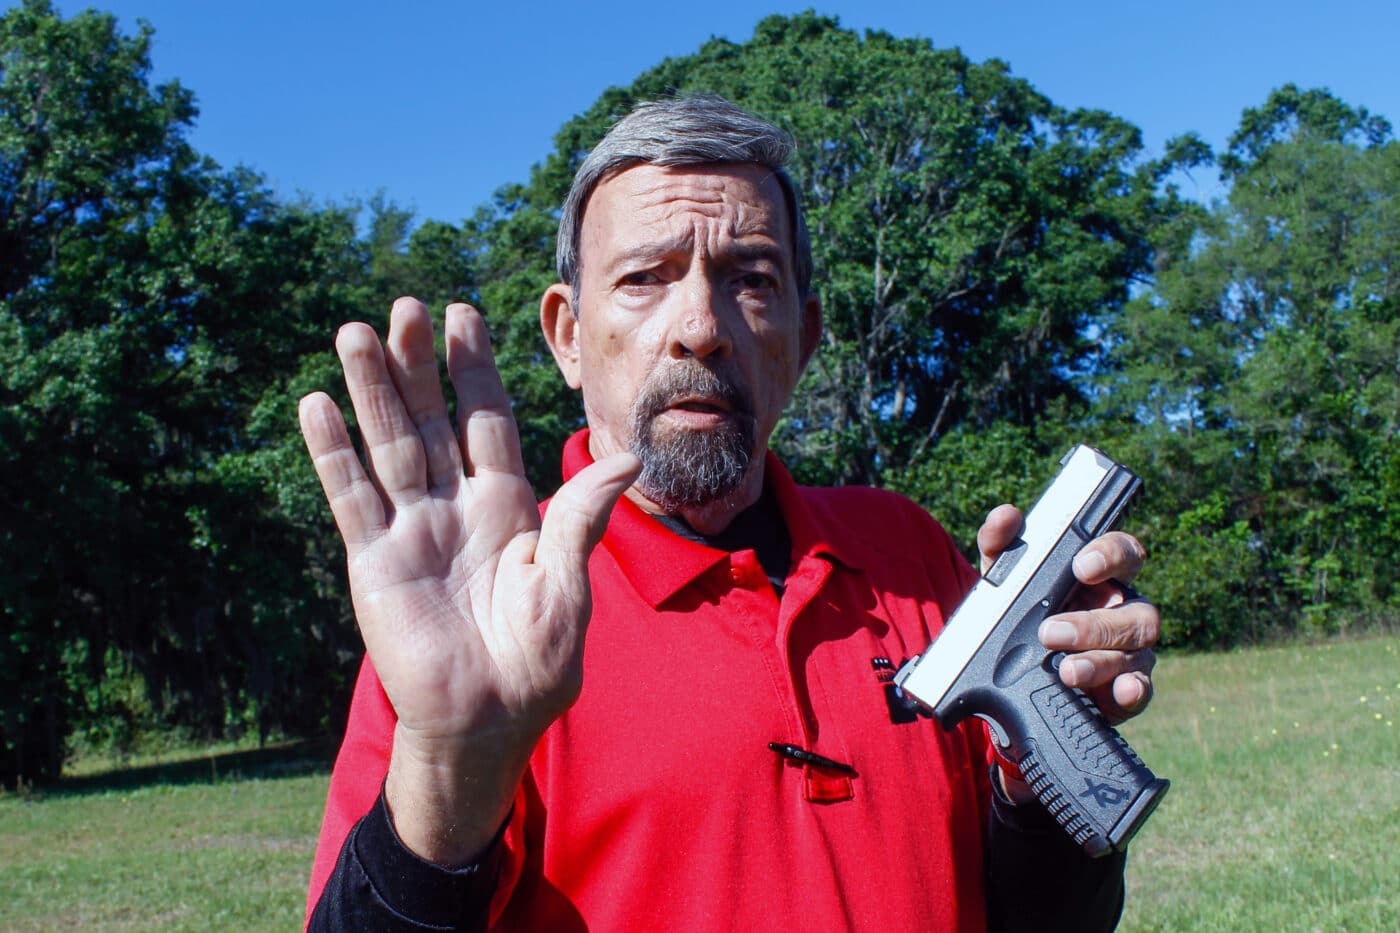 Massad Ayoob discusses hand placement on pistol for a proper grip